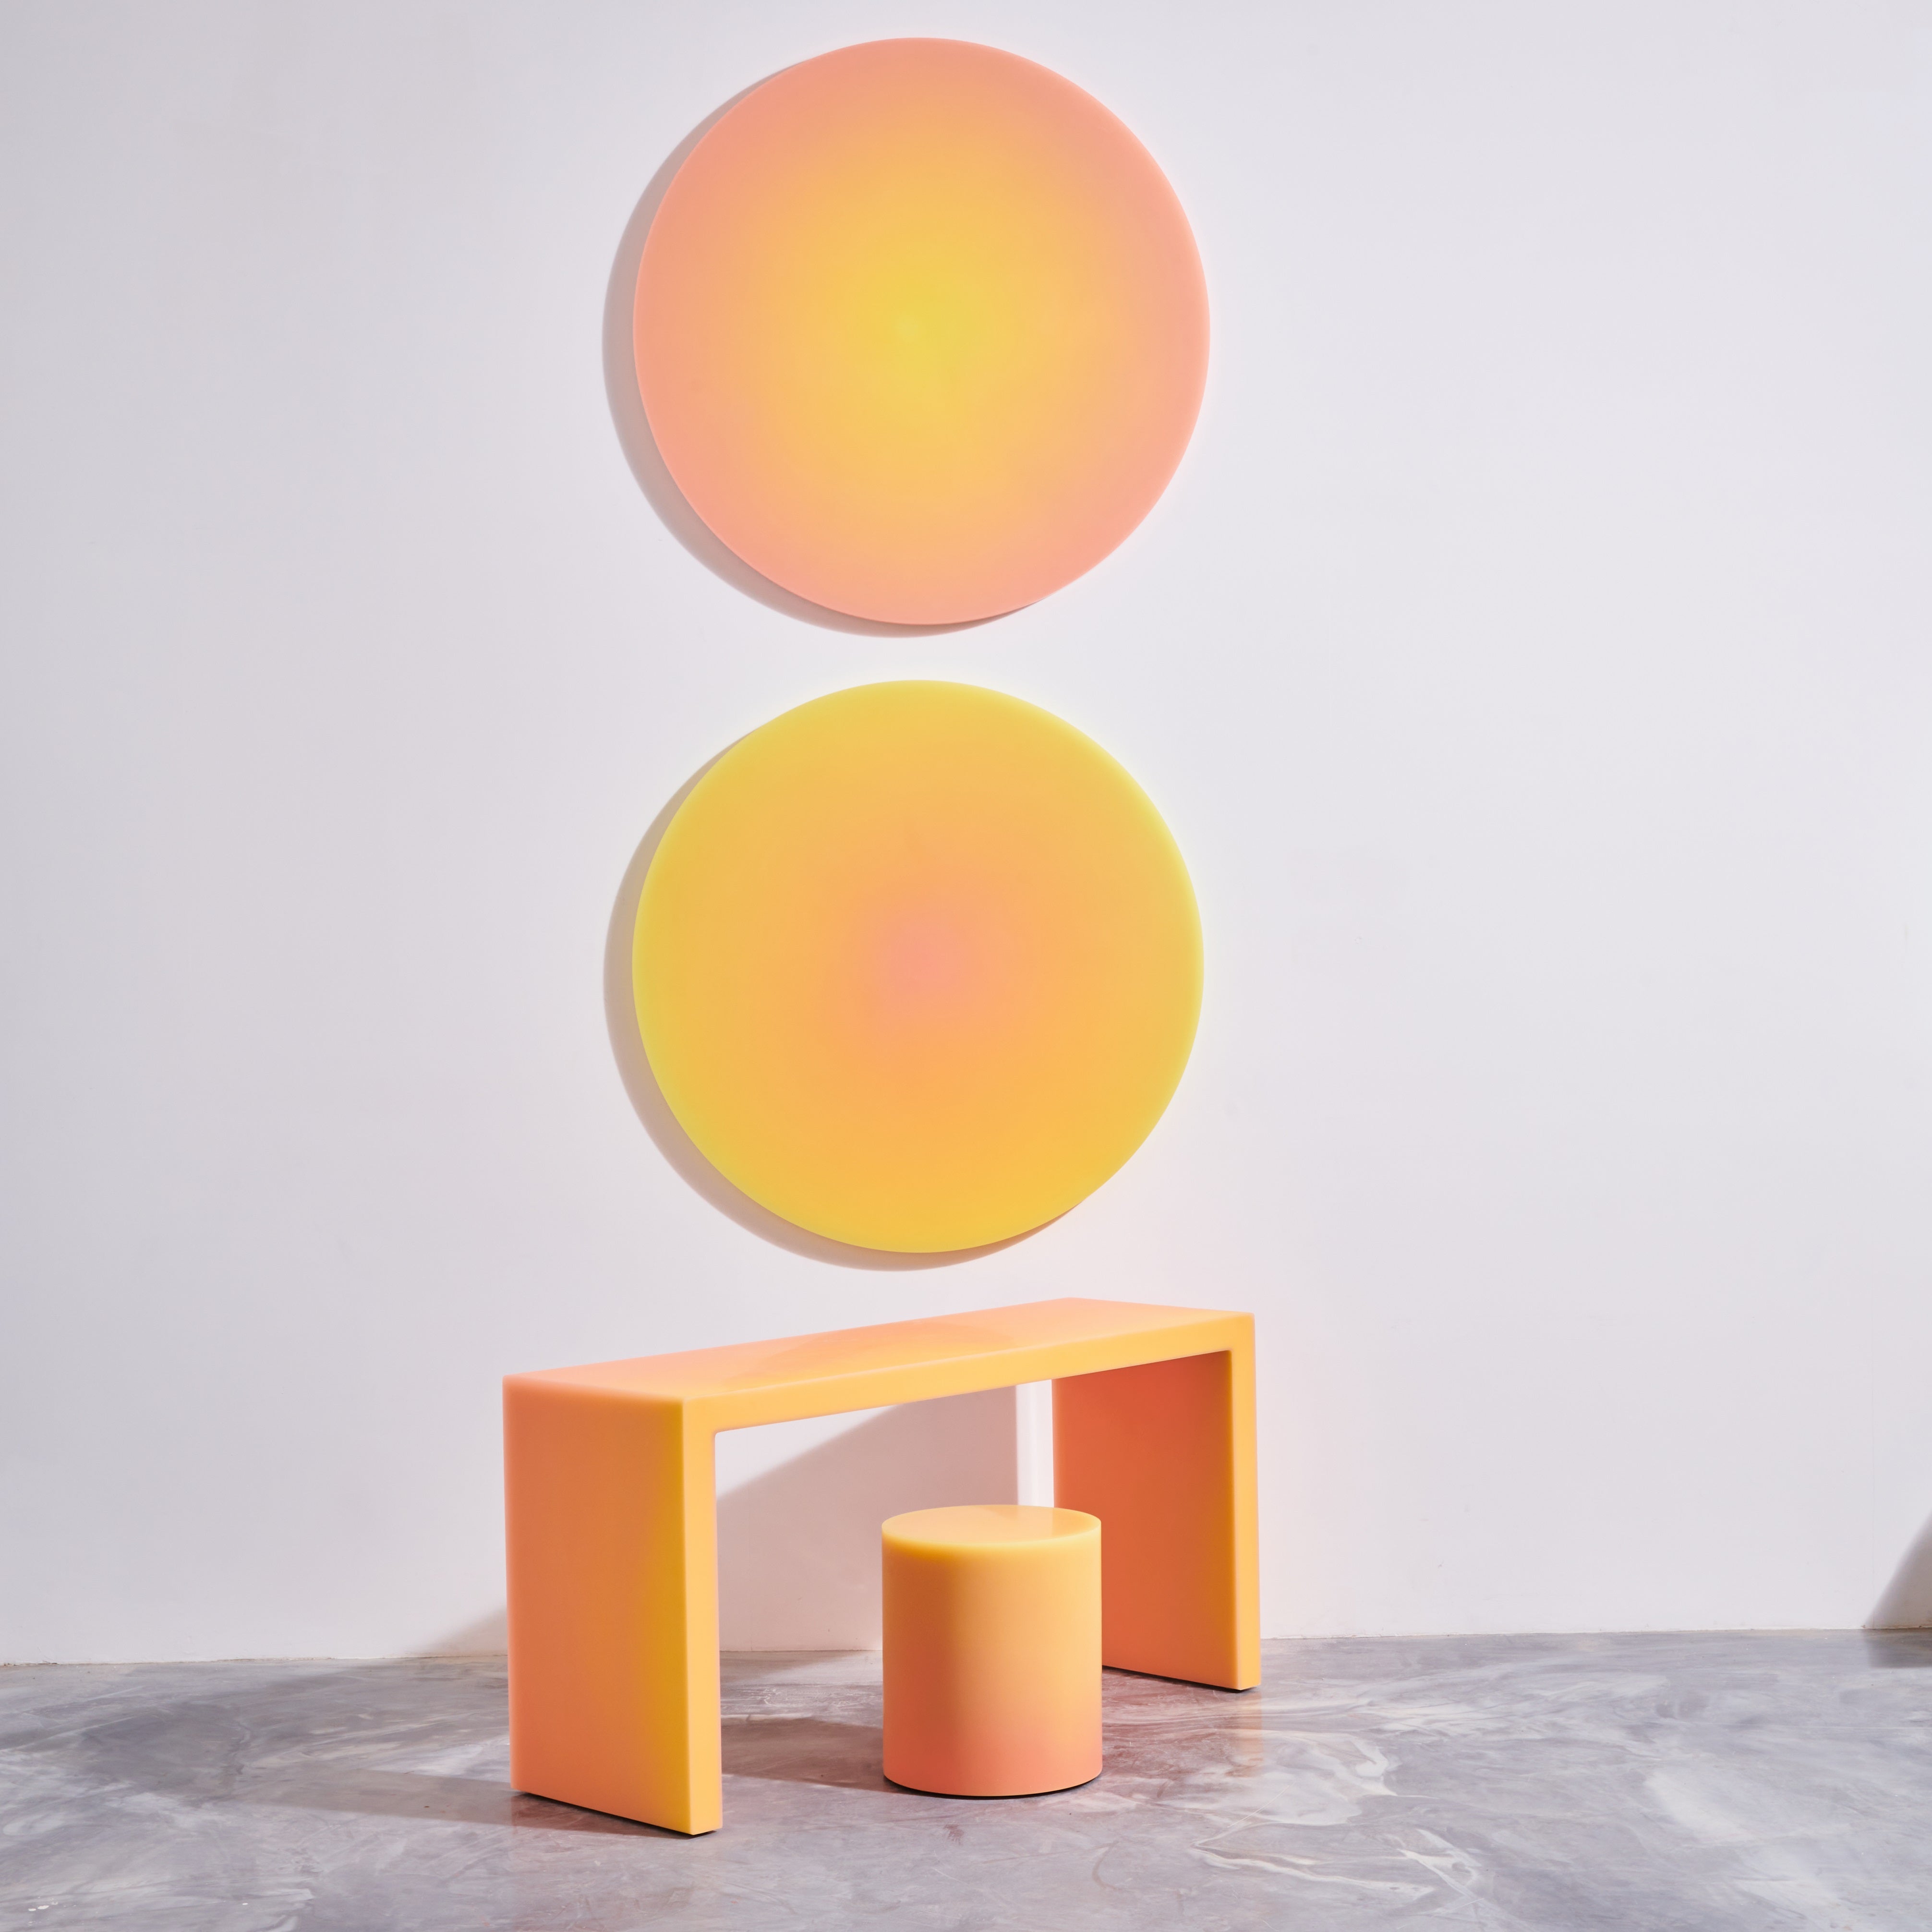 Colorful resin stool and side table is beige and coral by designer Facture. Available through fine art and design gallery Tuleste Factory in New York City.